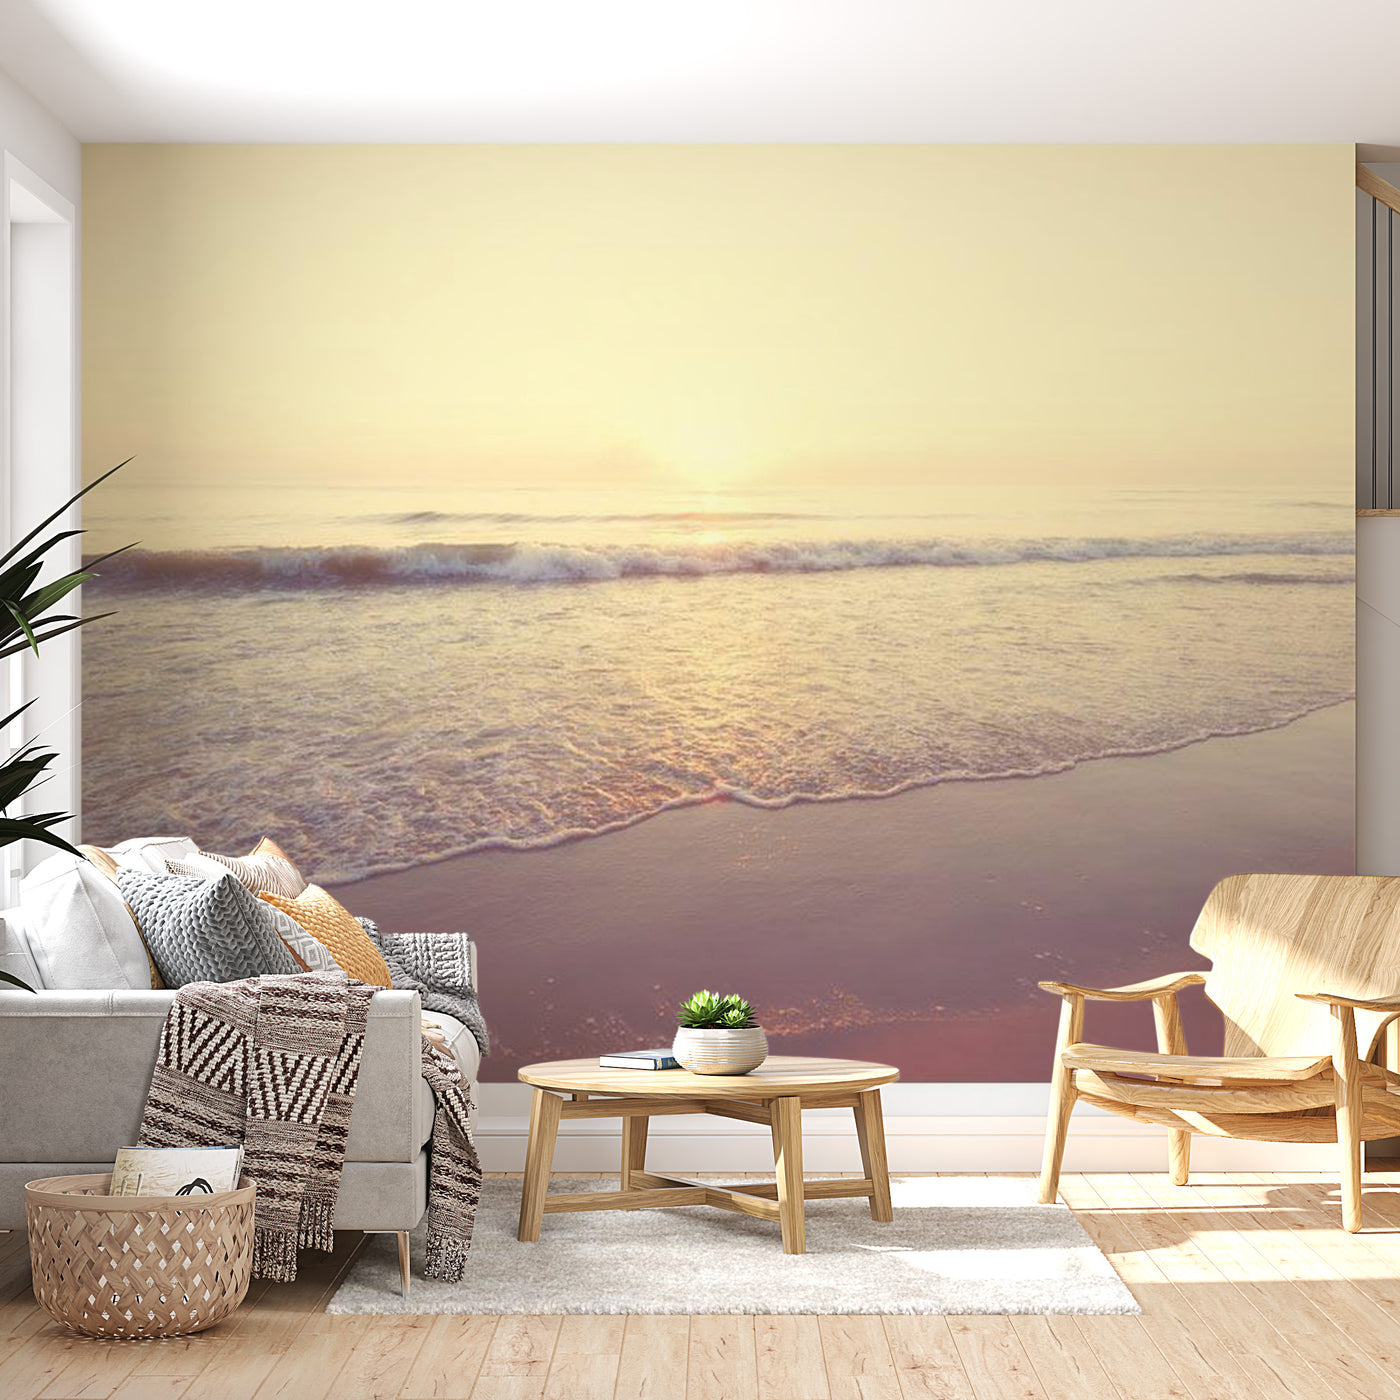 Peel & Stick Beach Wall Mural - Morning On The Beach - Removable Wall Decals